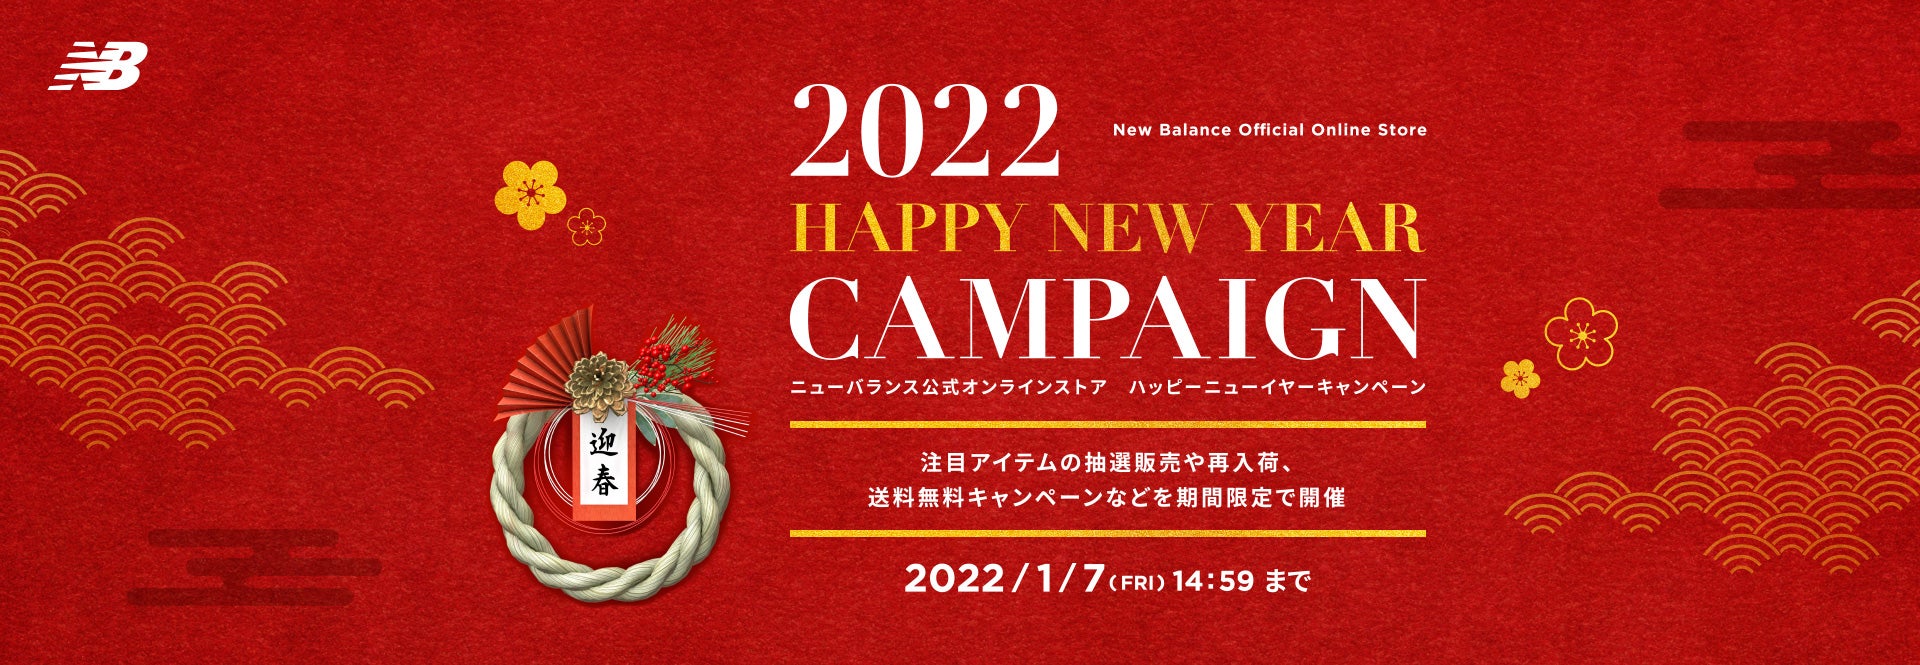 New Balance Official Online Store 2022 Happy New Year Campaign. 注目アイテムの抽選販売や再入荷、送料無料キャンペーンなどを期間限定で開催. 2022年1月7日(金)14:59まで